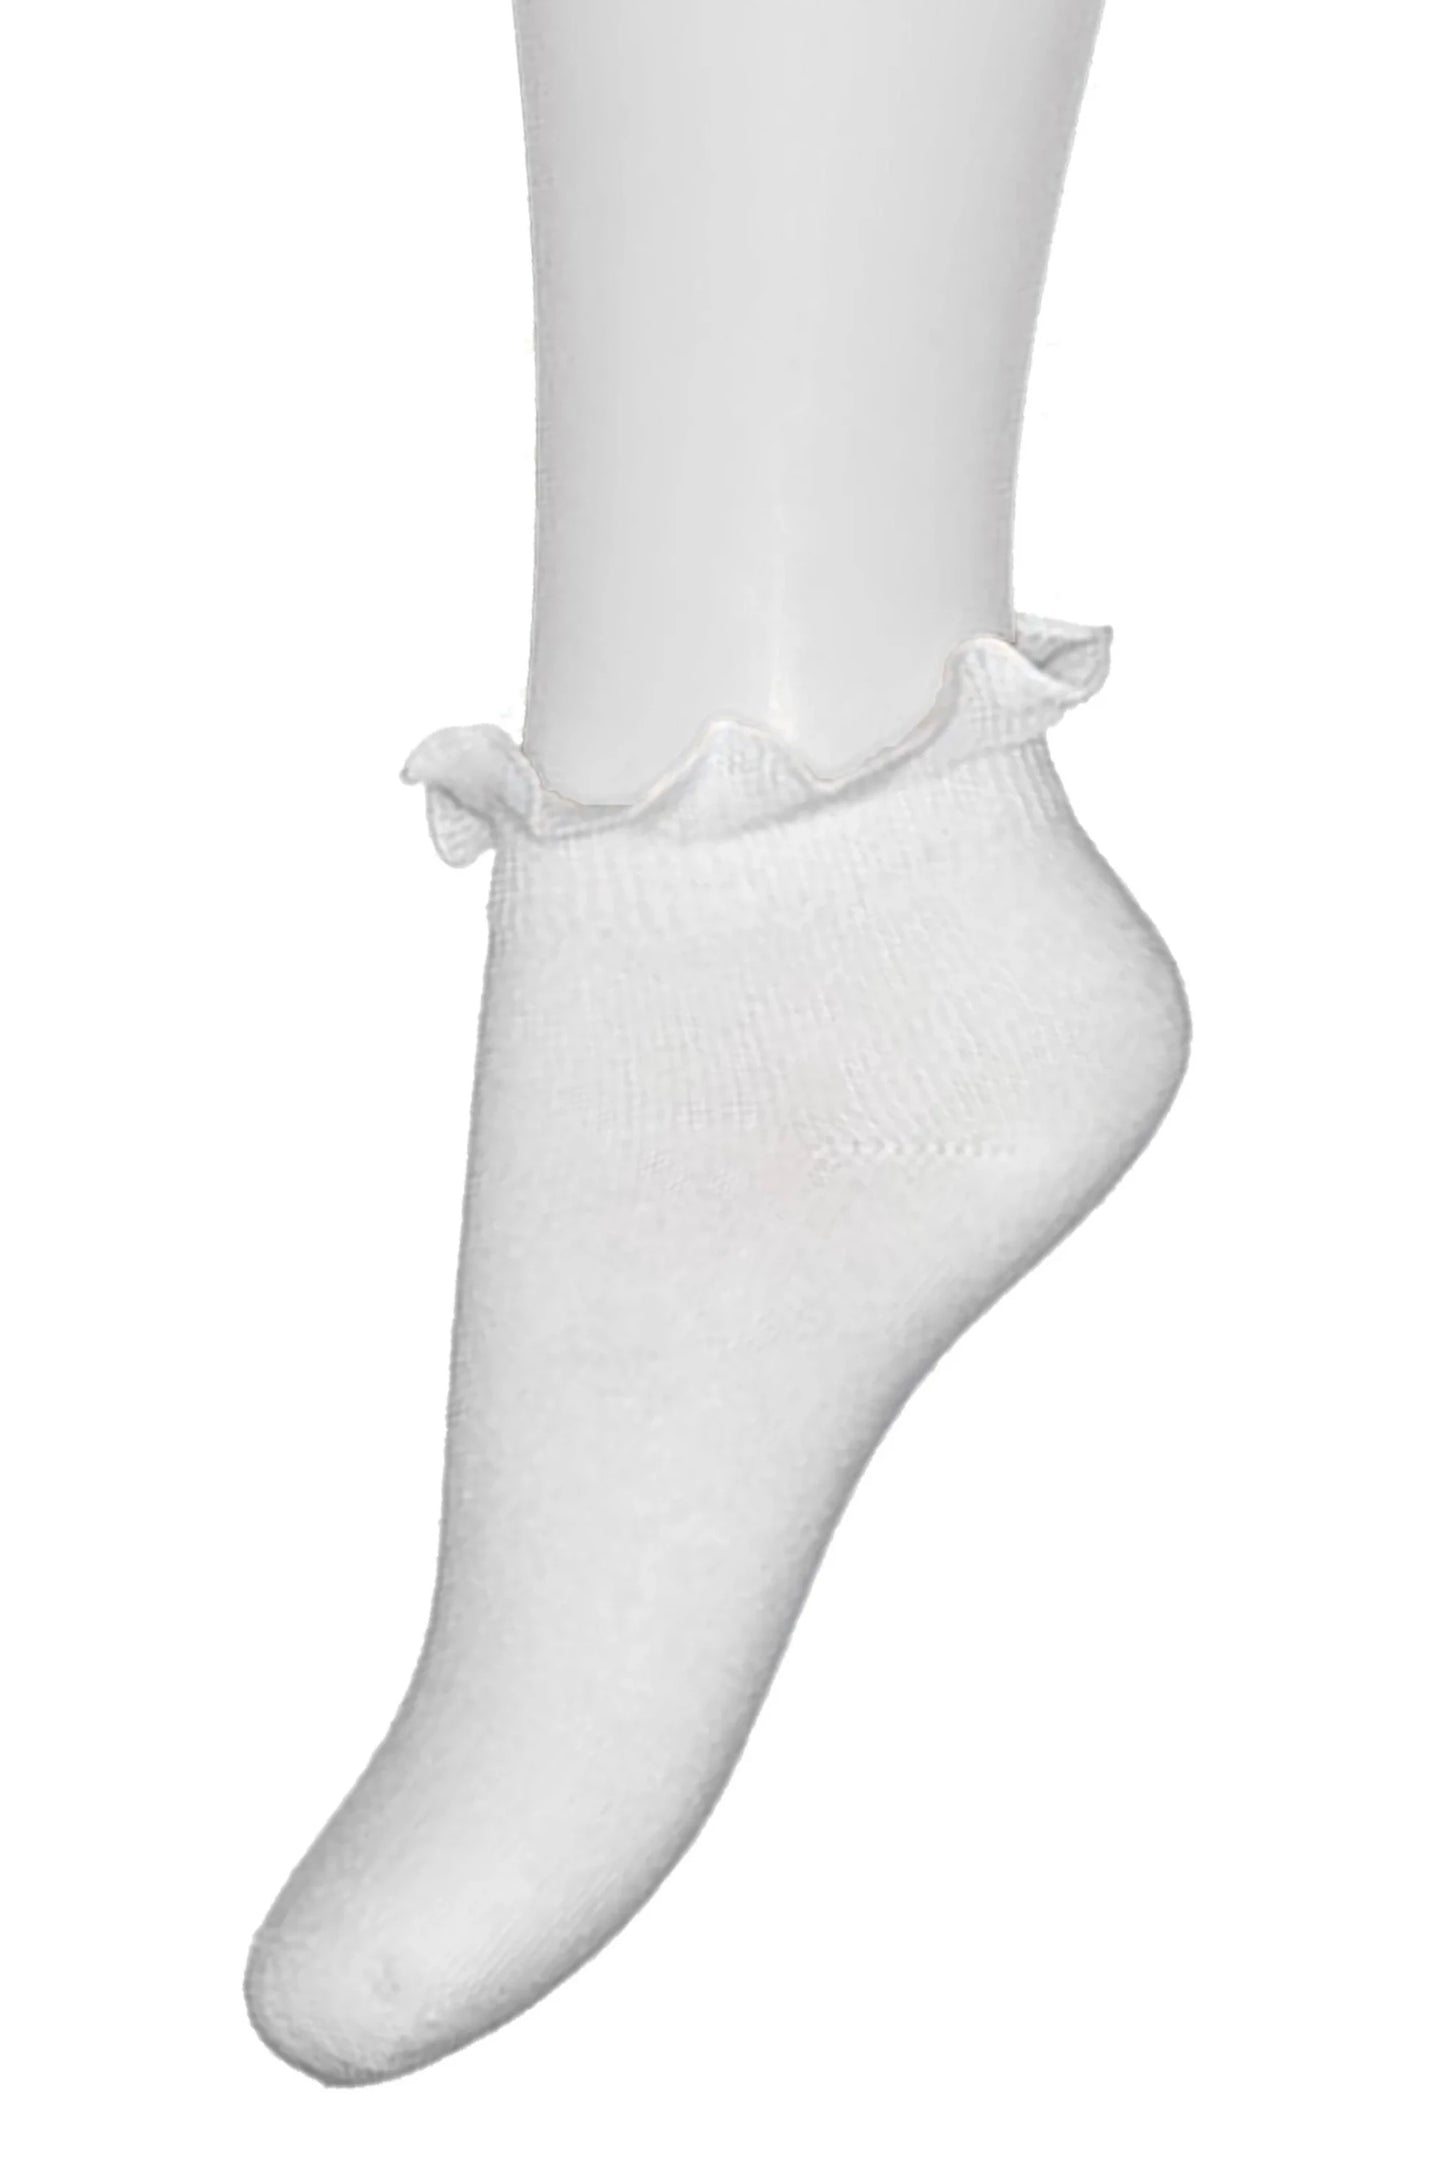 Bonnie Doon BN34.10.19 Lettuce Sock - cream low rise cotton ankle socks with frill cuff